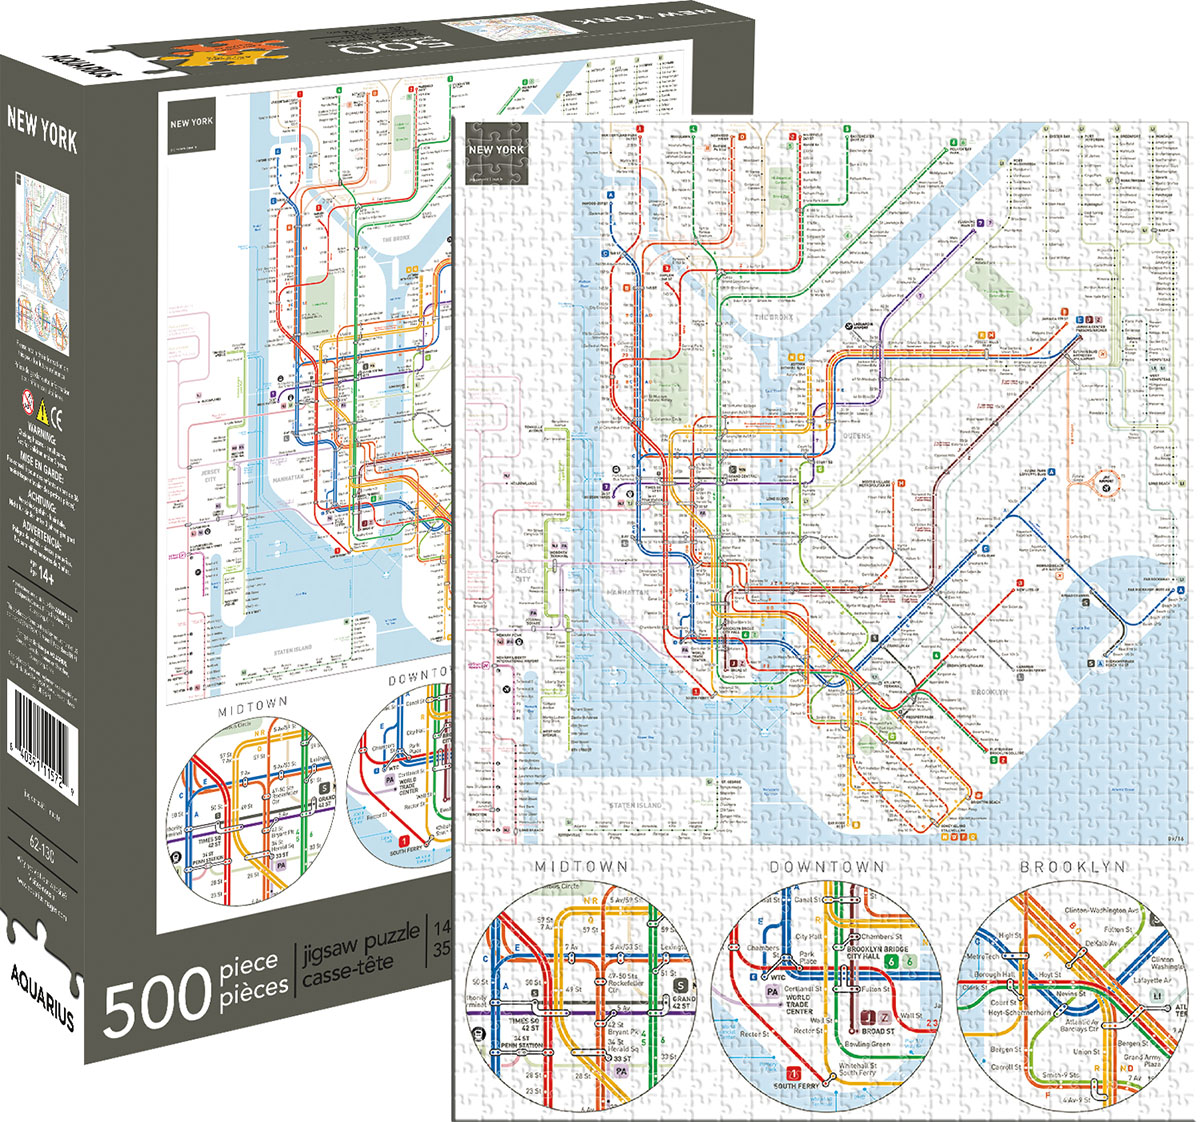 New York Subway Maps & Geography Jigsaw Puzzle